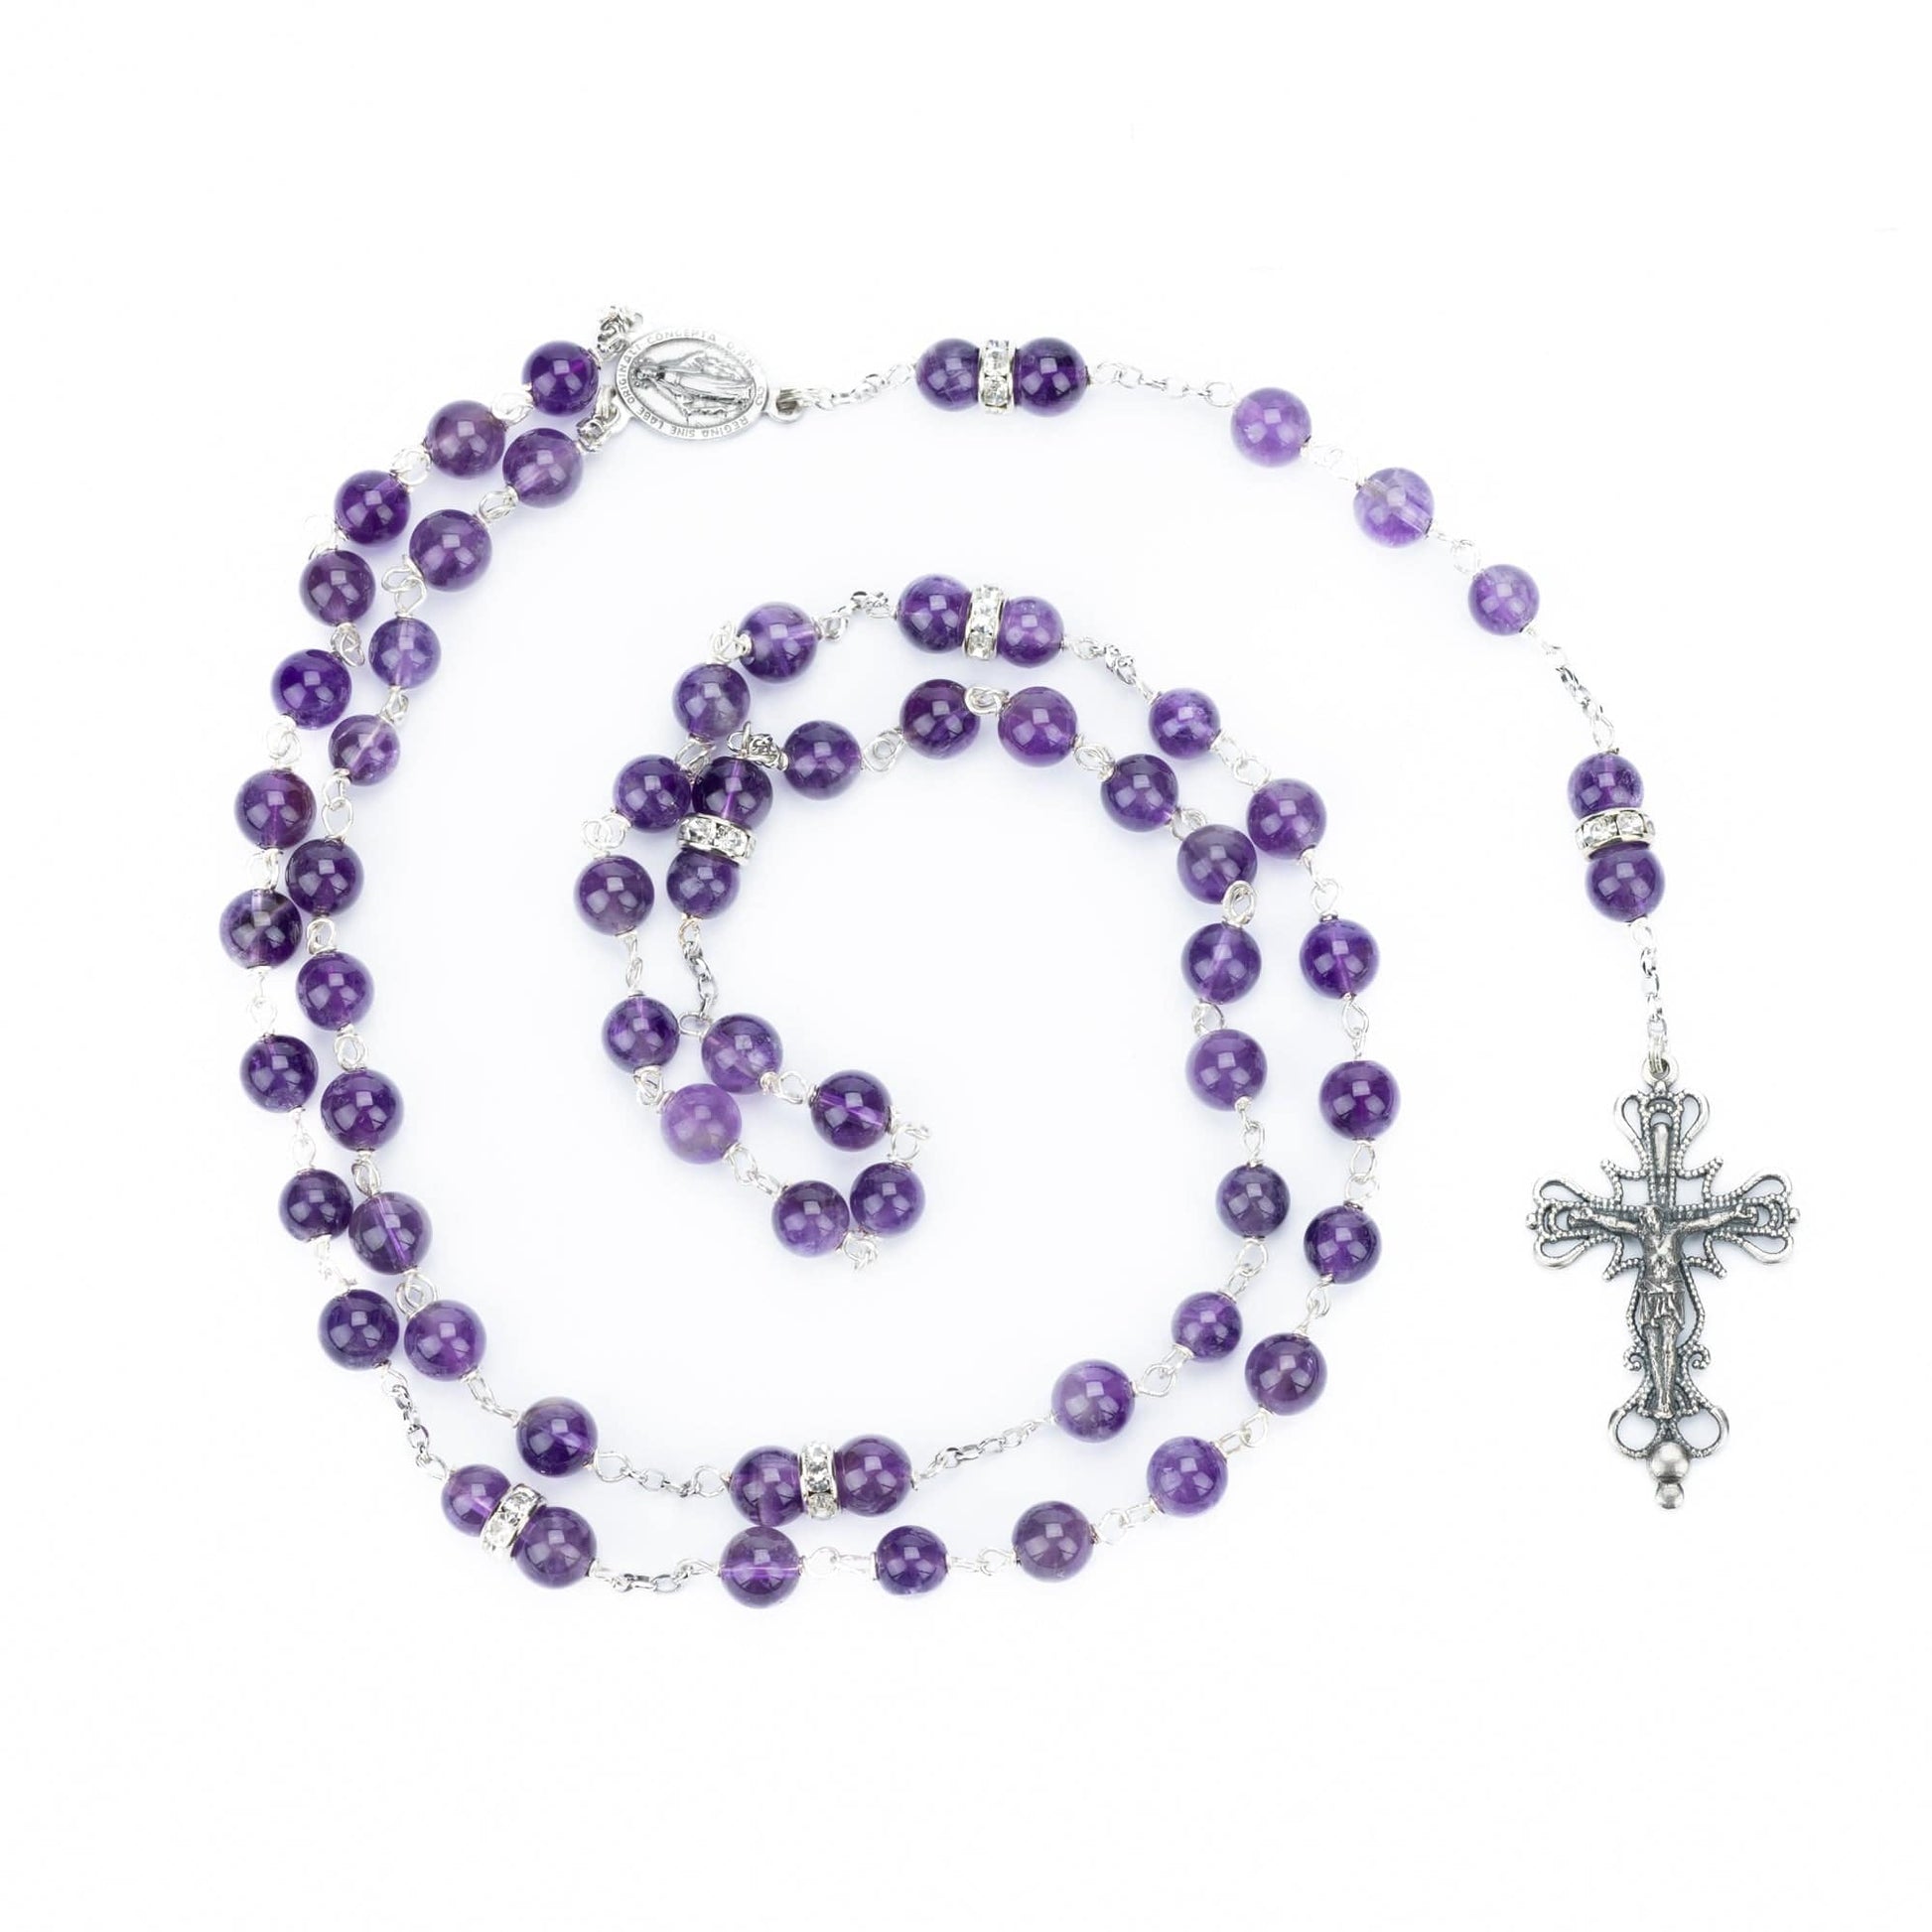 MONDO CATTOLICO Prayer Beads AMETHIST STERLING SILVER ROSARY